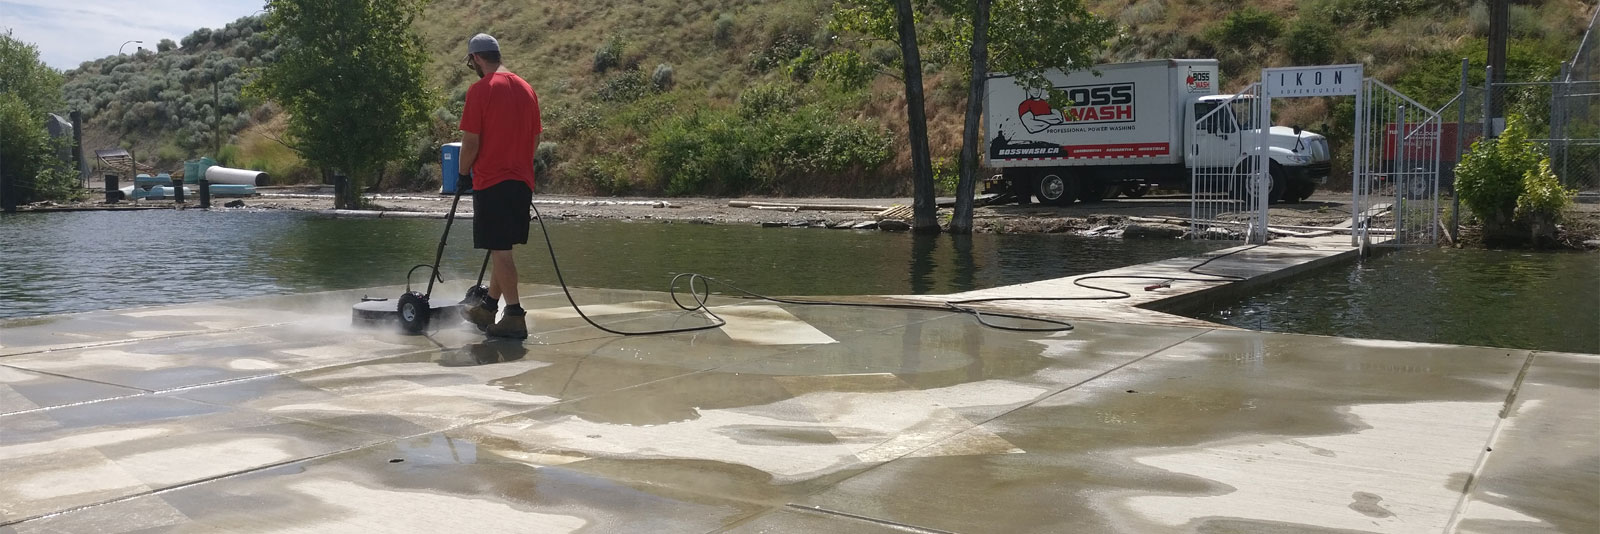 high pressure spray cleaning concrete